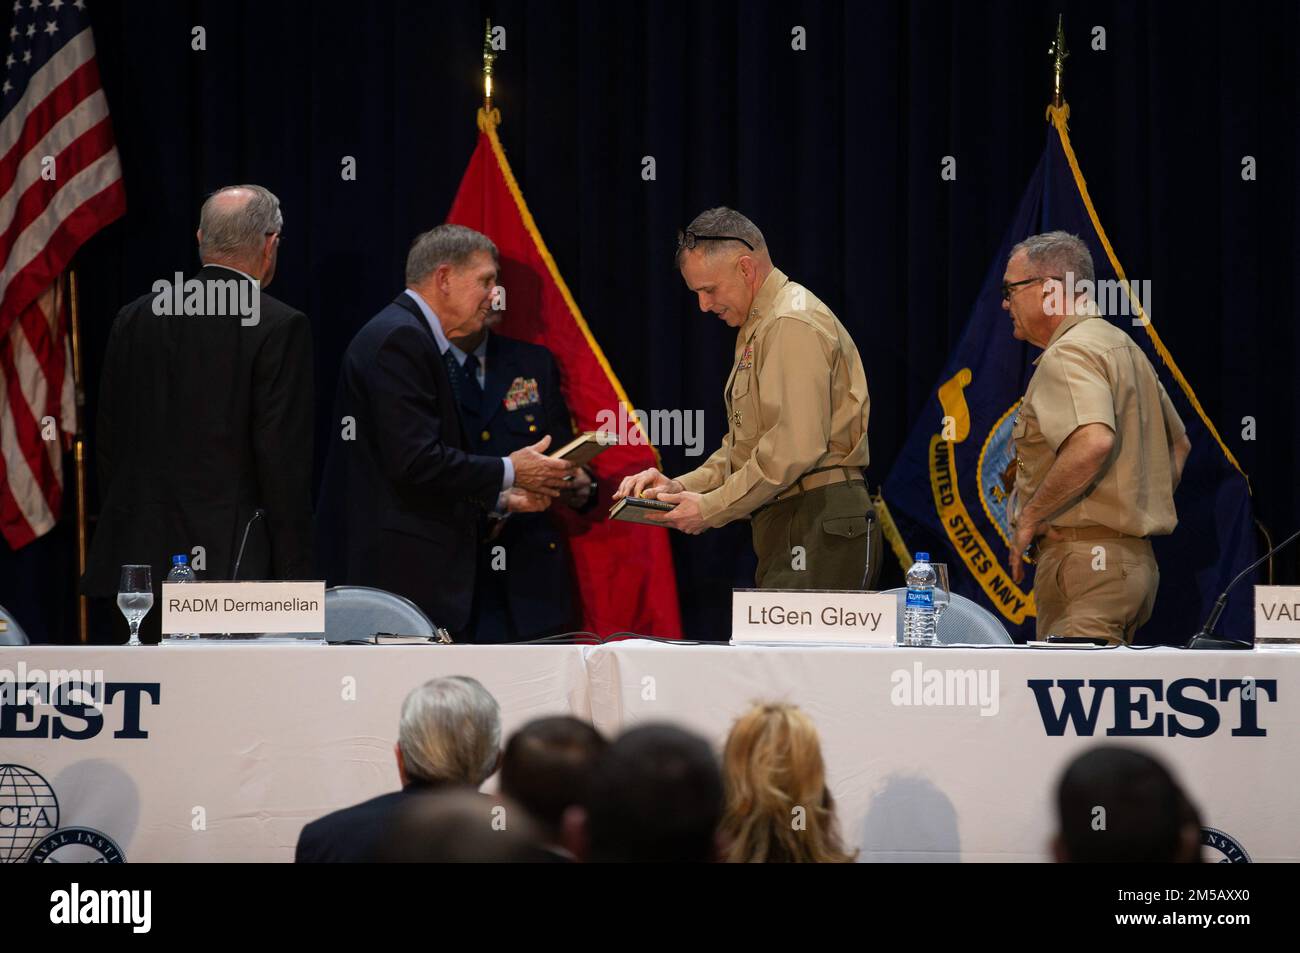 U.S. Marine Lt. Gen. Matthew G. Glavy, the deputy commandant for information, receives a book during the West 2022 Conference at the San Diego Convention Center in San Diego, California, Feb. 17, 2022. Throughout West 22, leaders from the Navy, Marine Corps and Coast Guard discussed modernization efforts and future concepts that support the Sea Services' operations. West 22 provides a venue for senior military and government officials to gain valuable direct feedback from operators and partners in the industry. Stock Photo